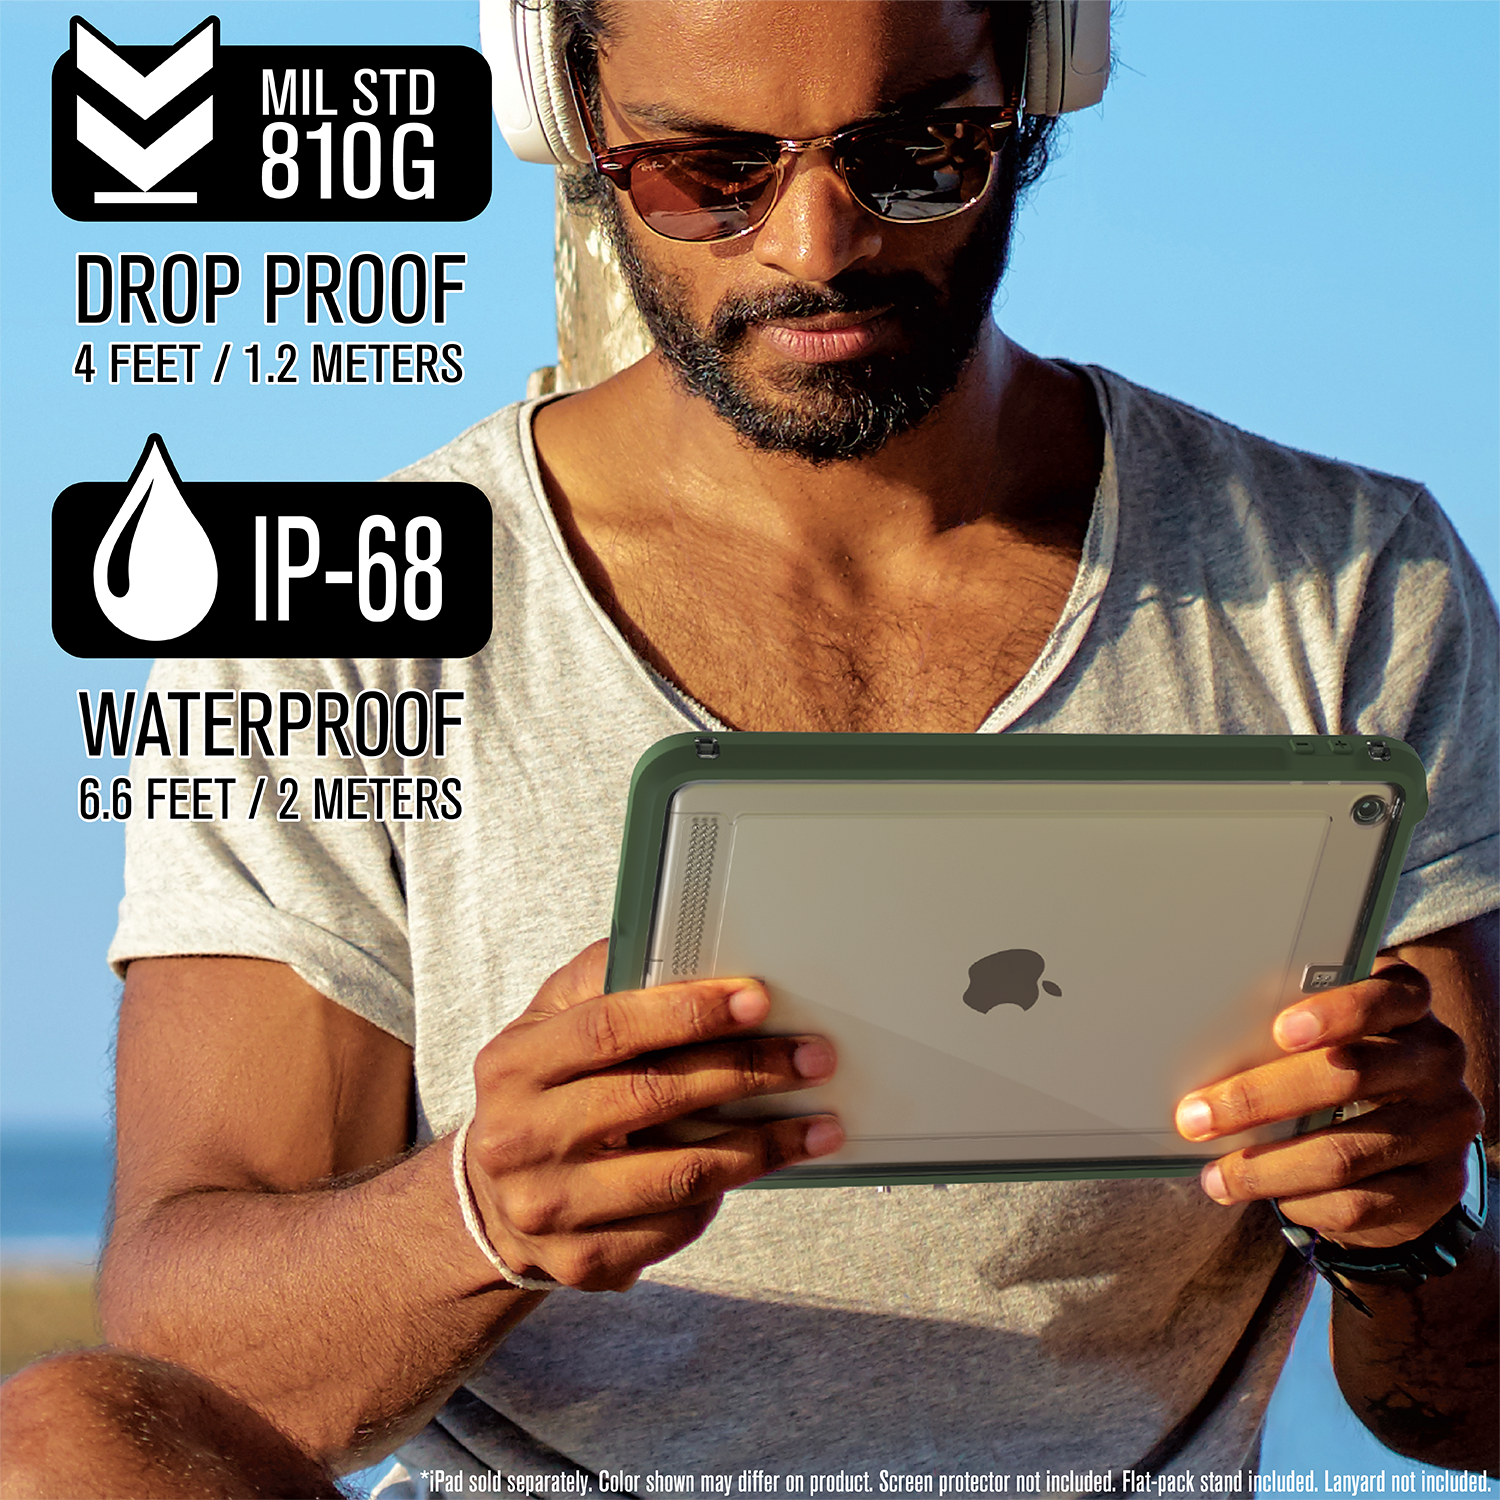 CATIPD7THGRN | Waterproof Case for 10.2" iPad (2019)